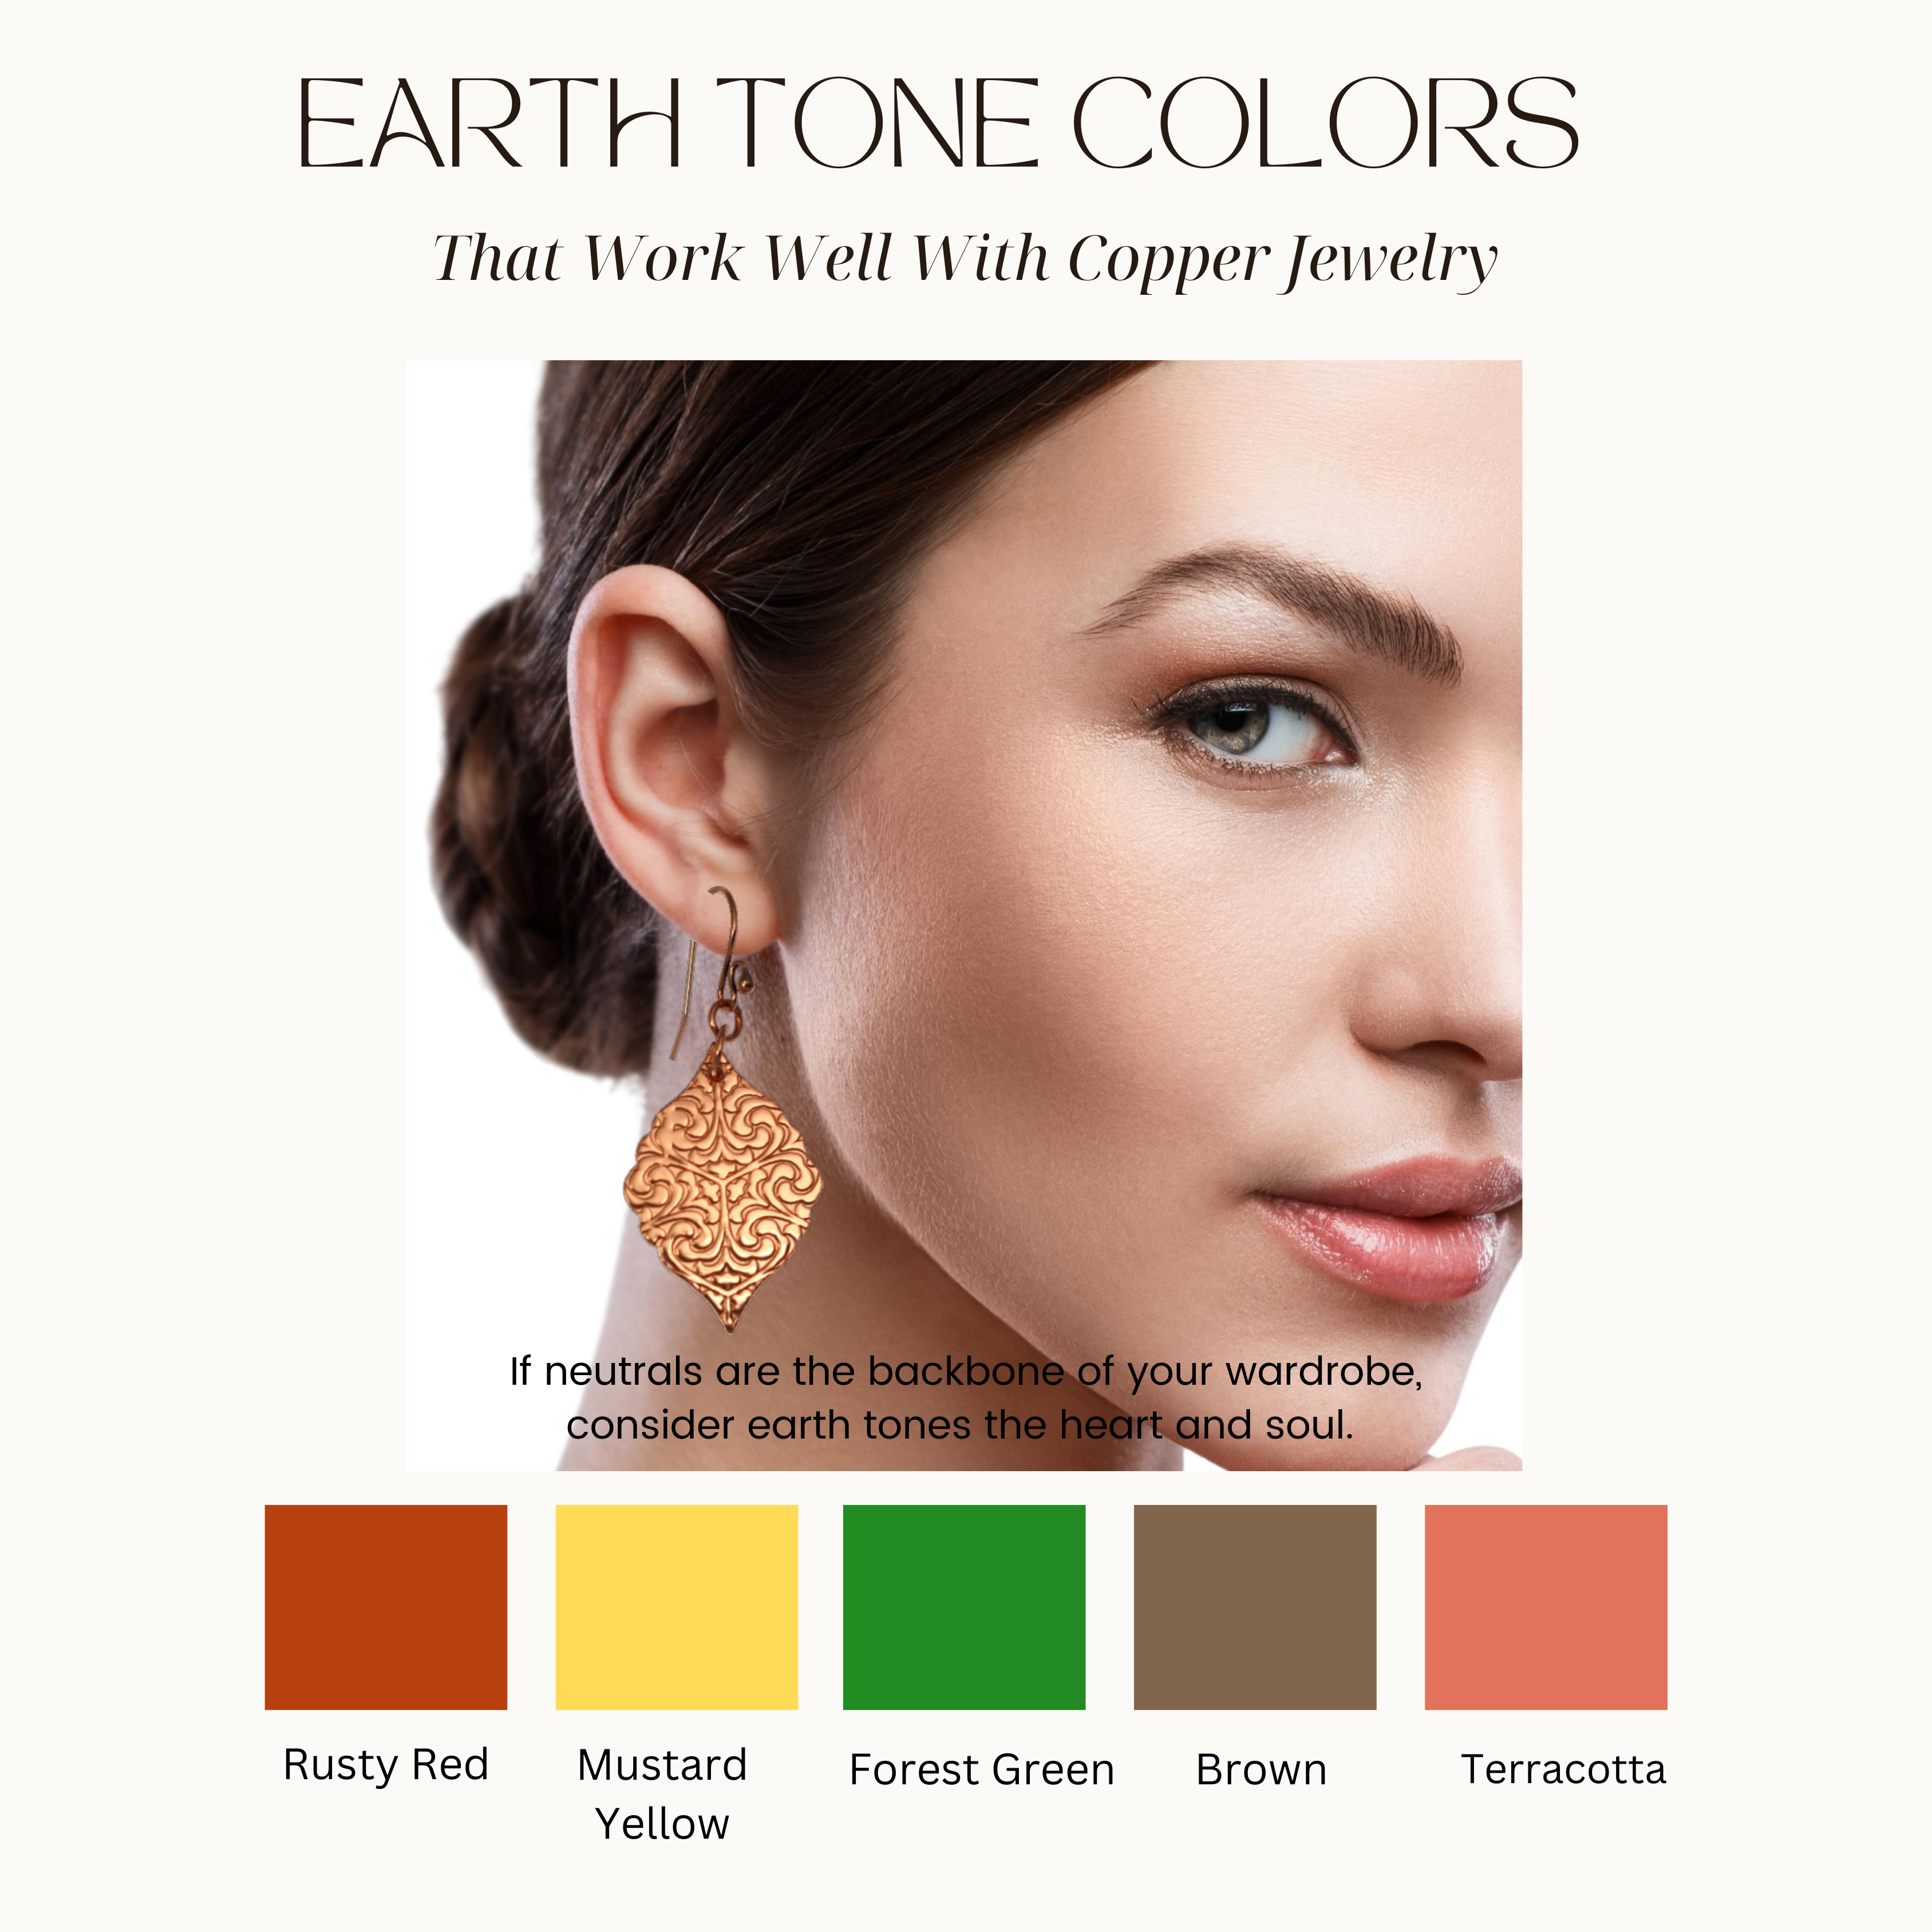 Woman Wearing Copper Earrings, with text "Earth Tone Colors That Work Well With Copper Jewelry"